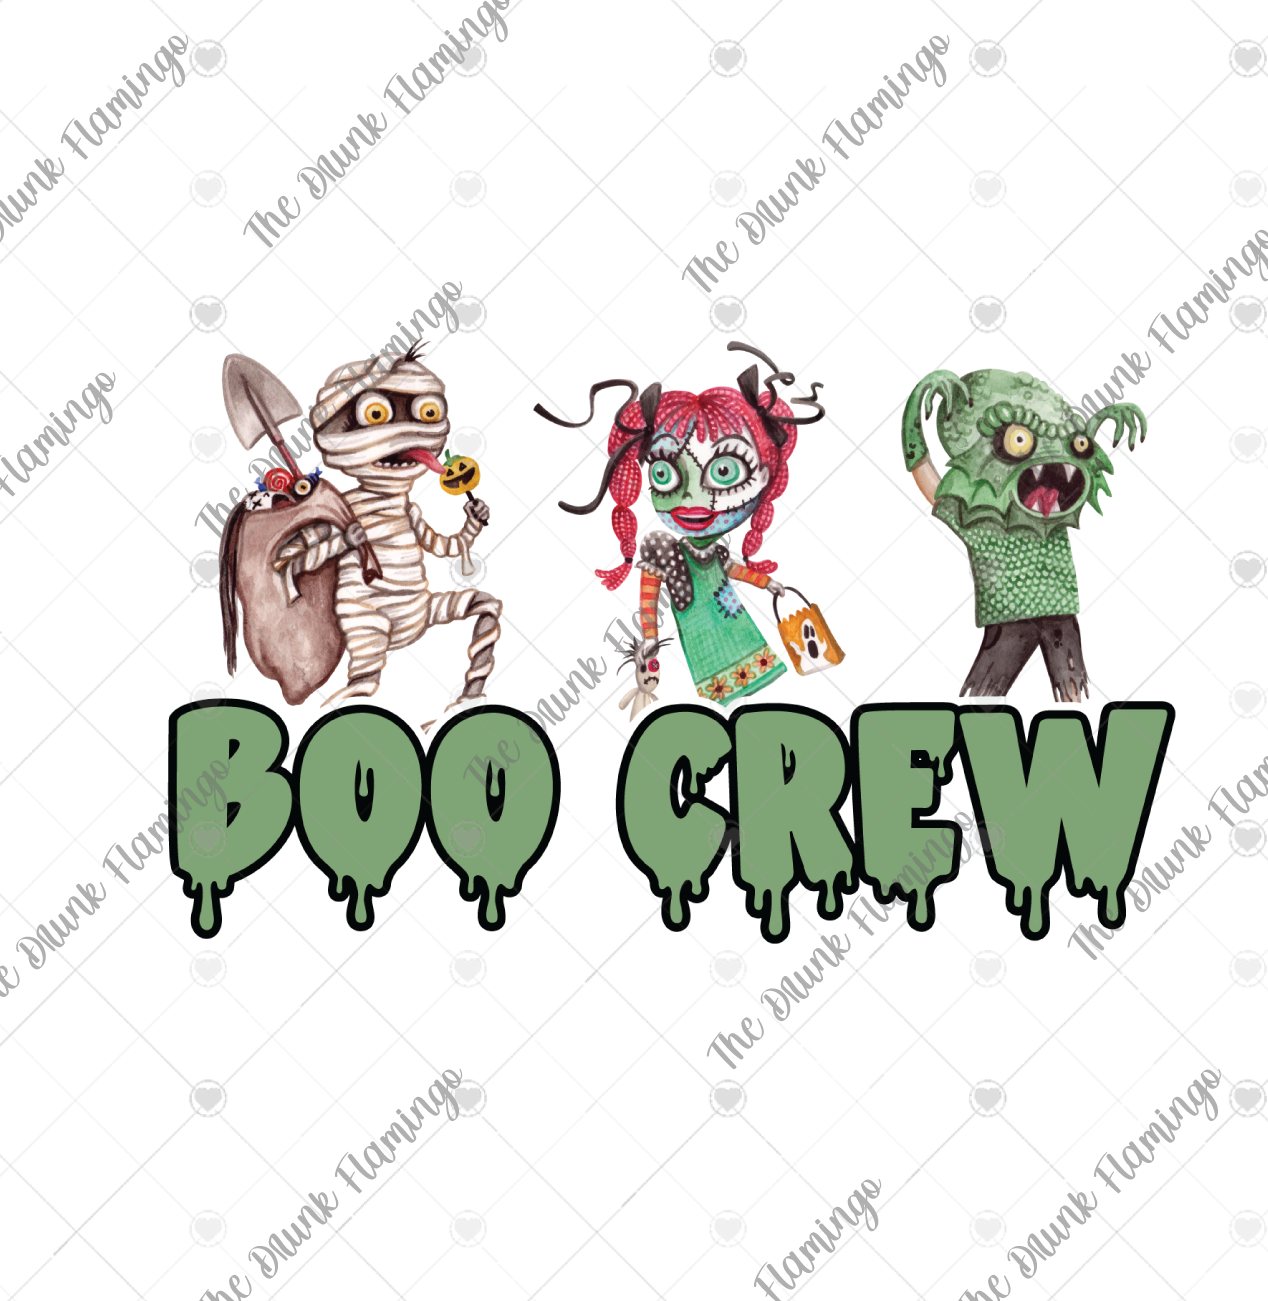 81- Boo crew WHITE backed decal